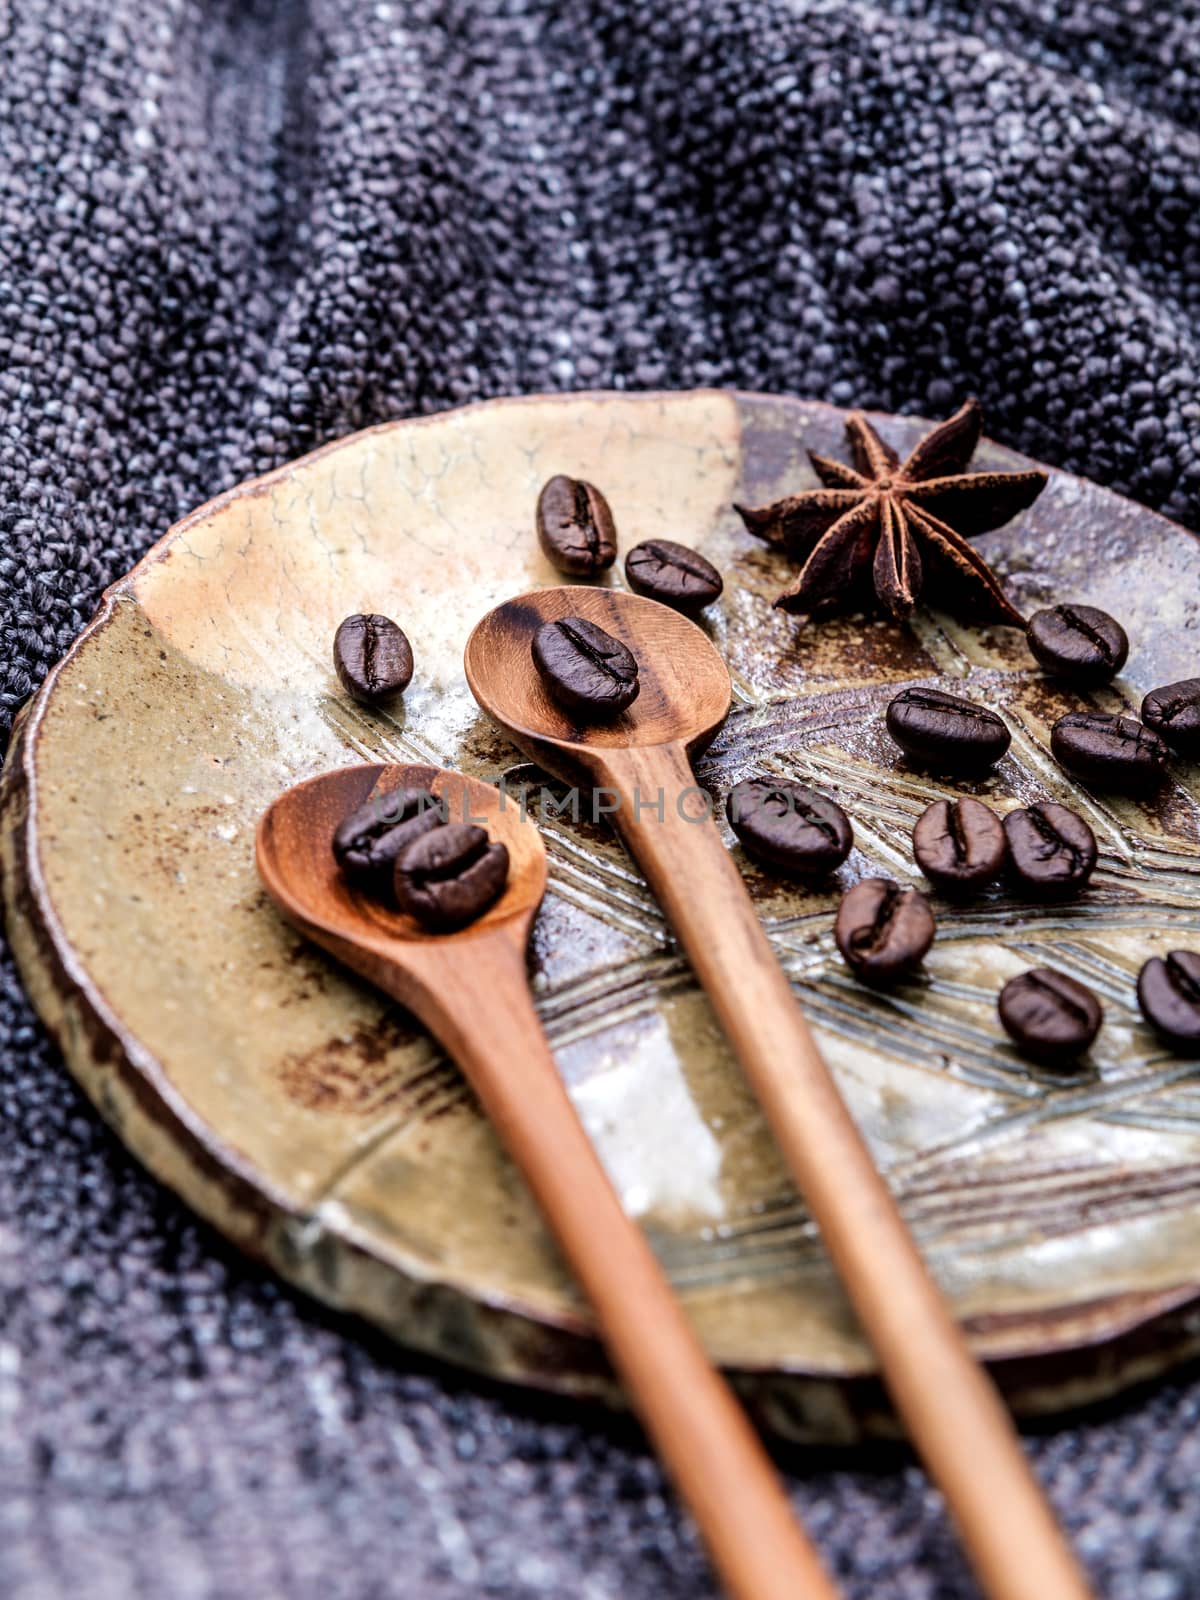 Coffee beans and star anise in ceramic plate with wooden spoons on dark fabric .